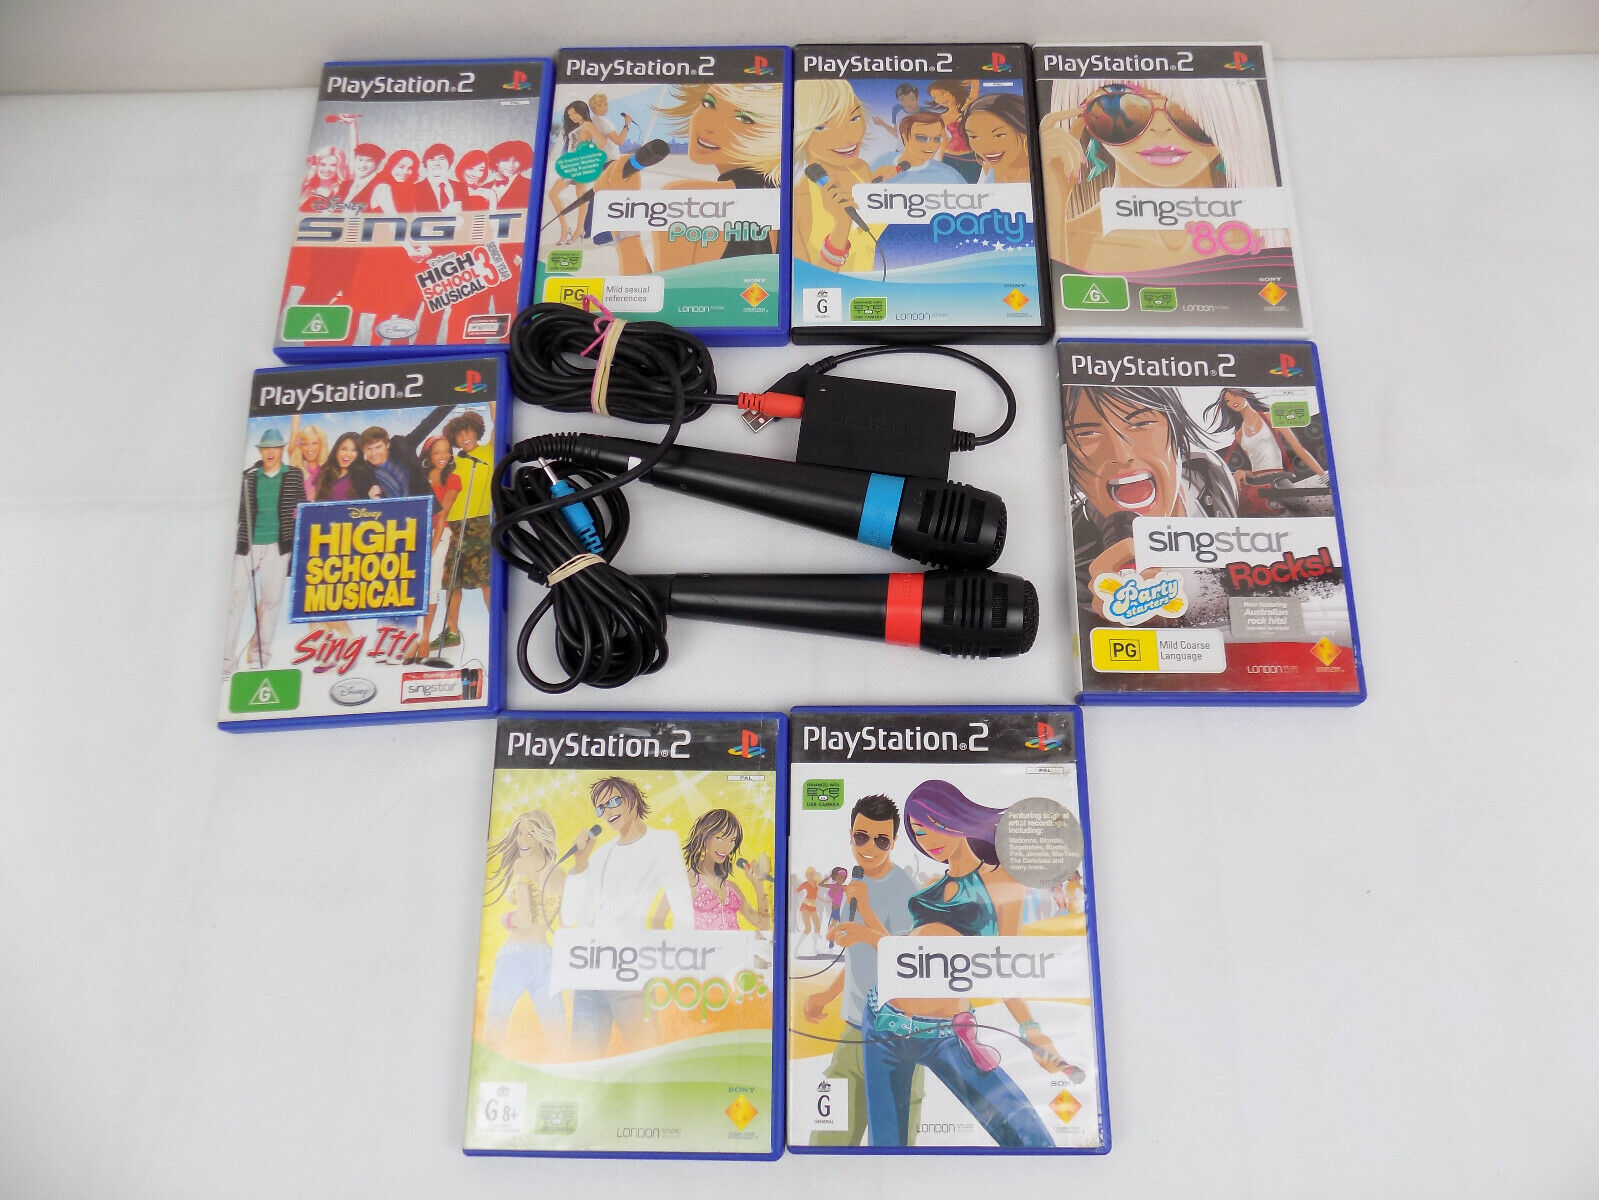 singstar ps2 with mics